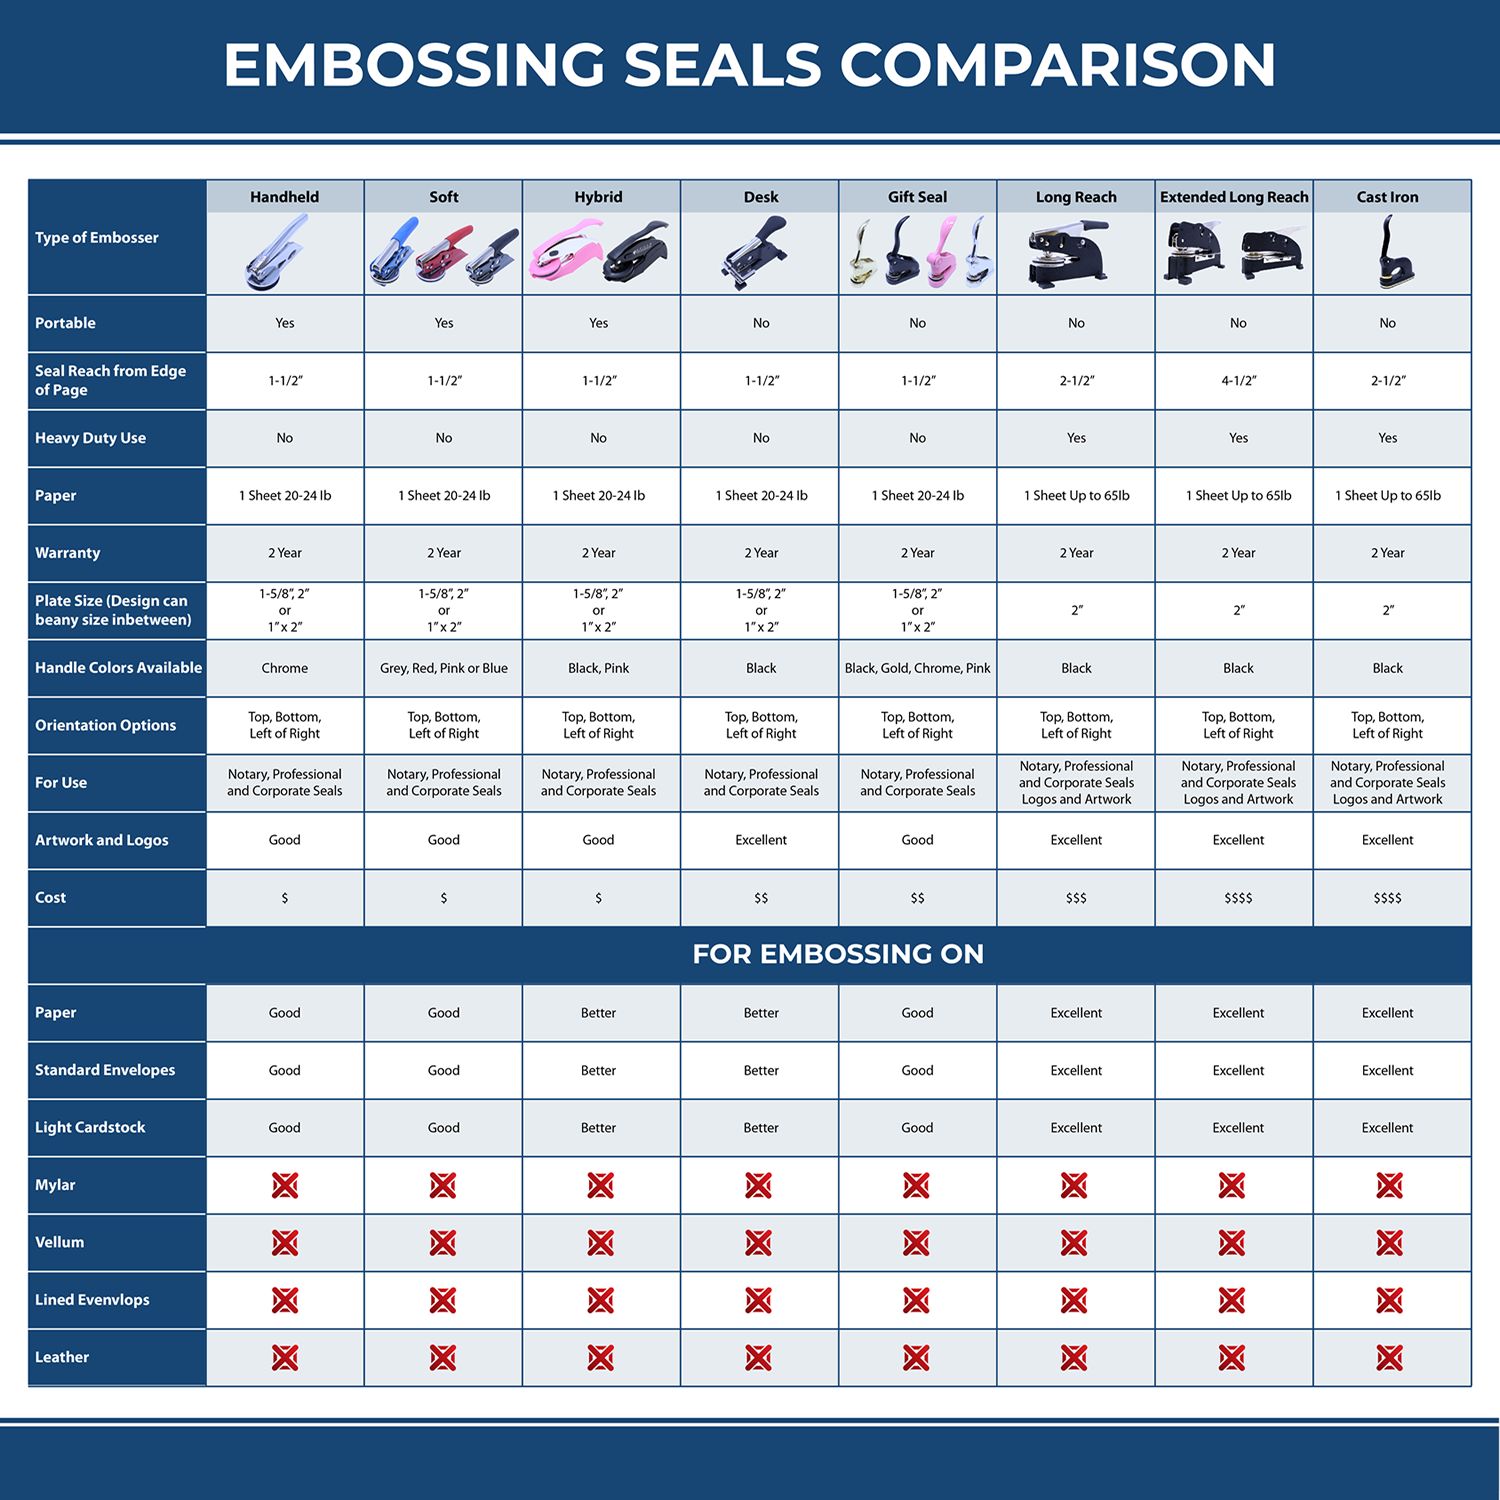 A comparison chart for the different types of mount models available for the Heavy Duty Cast Iron Arkansas Architect Embosser.